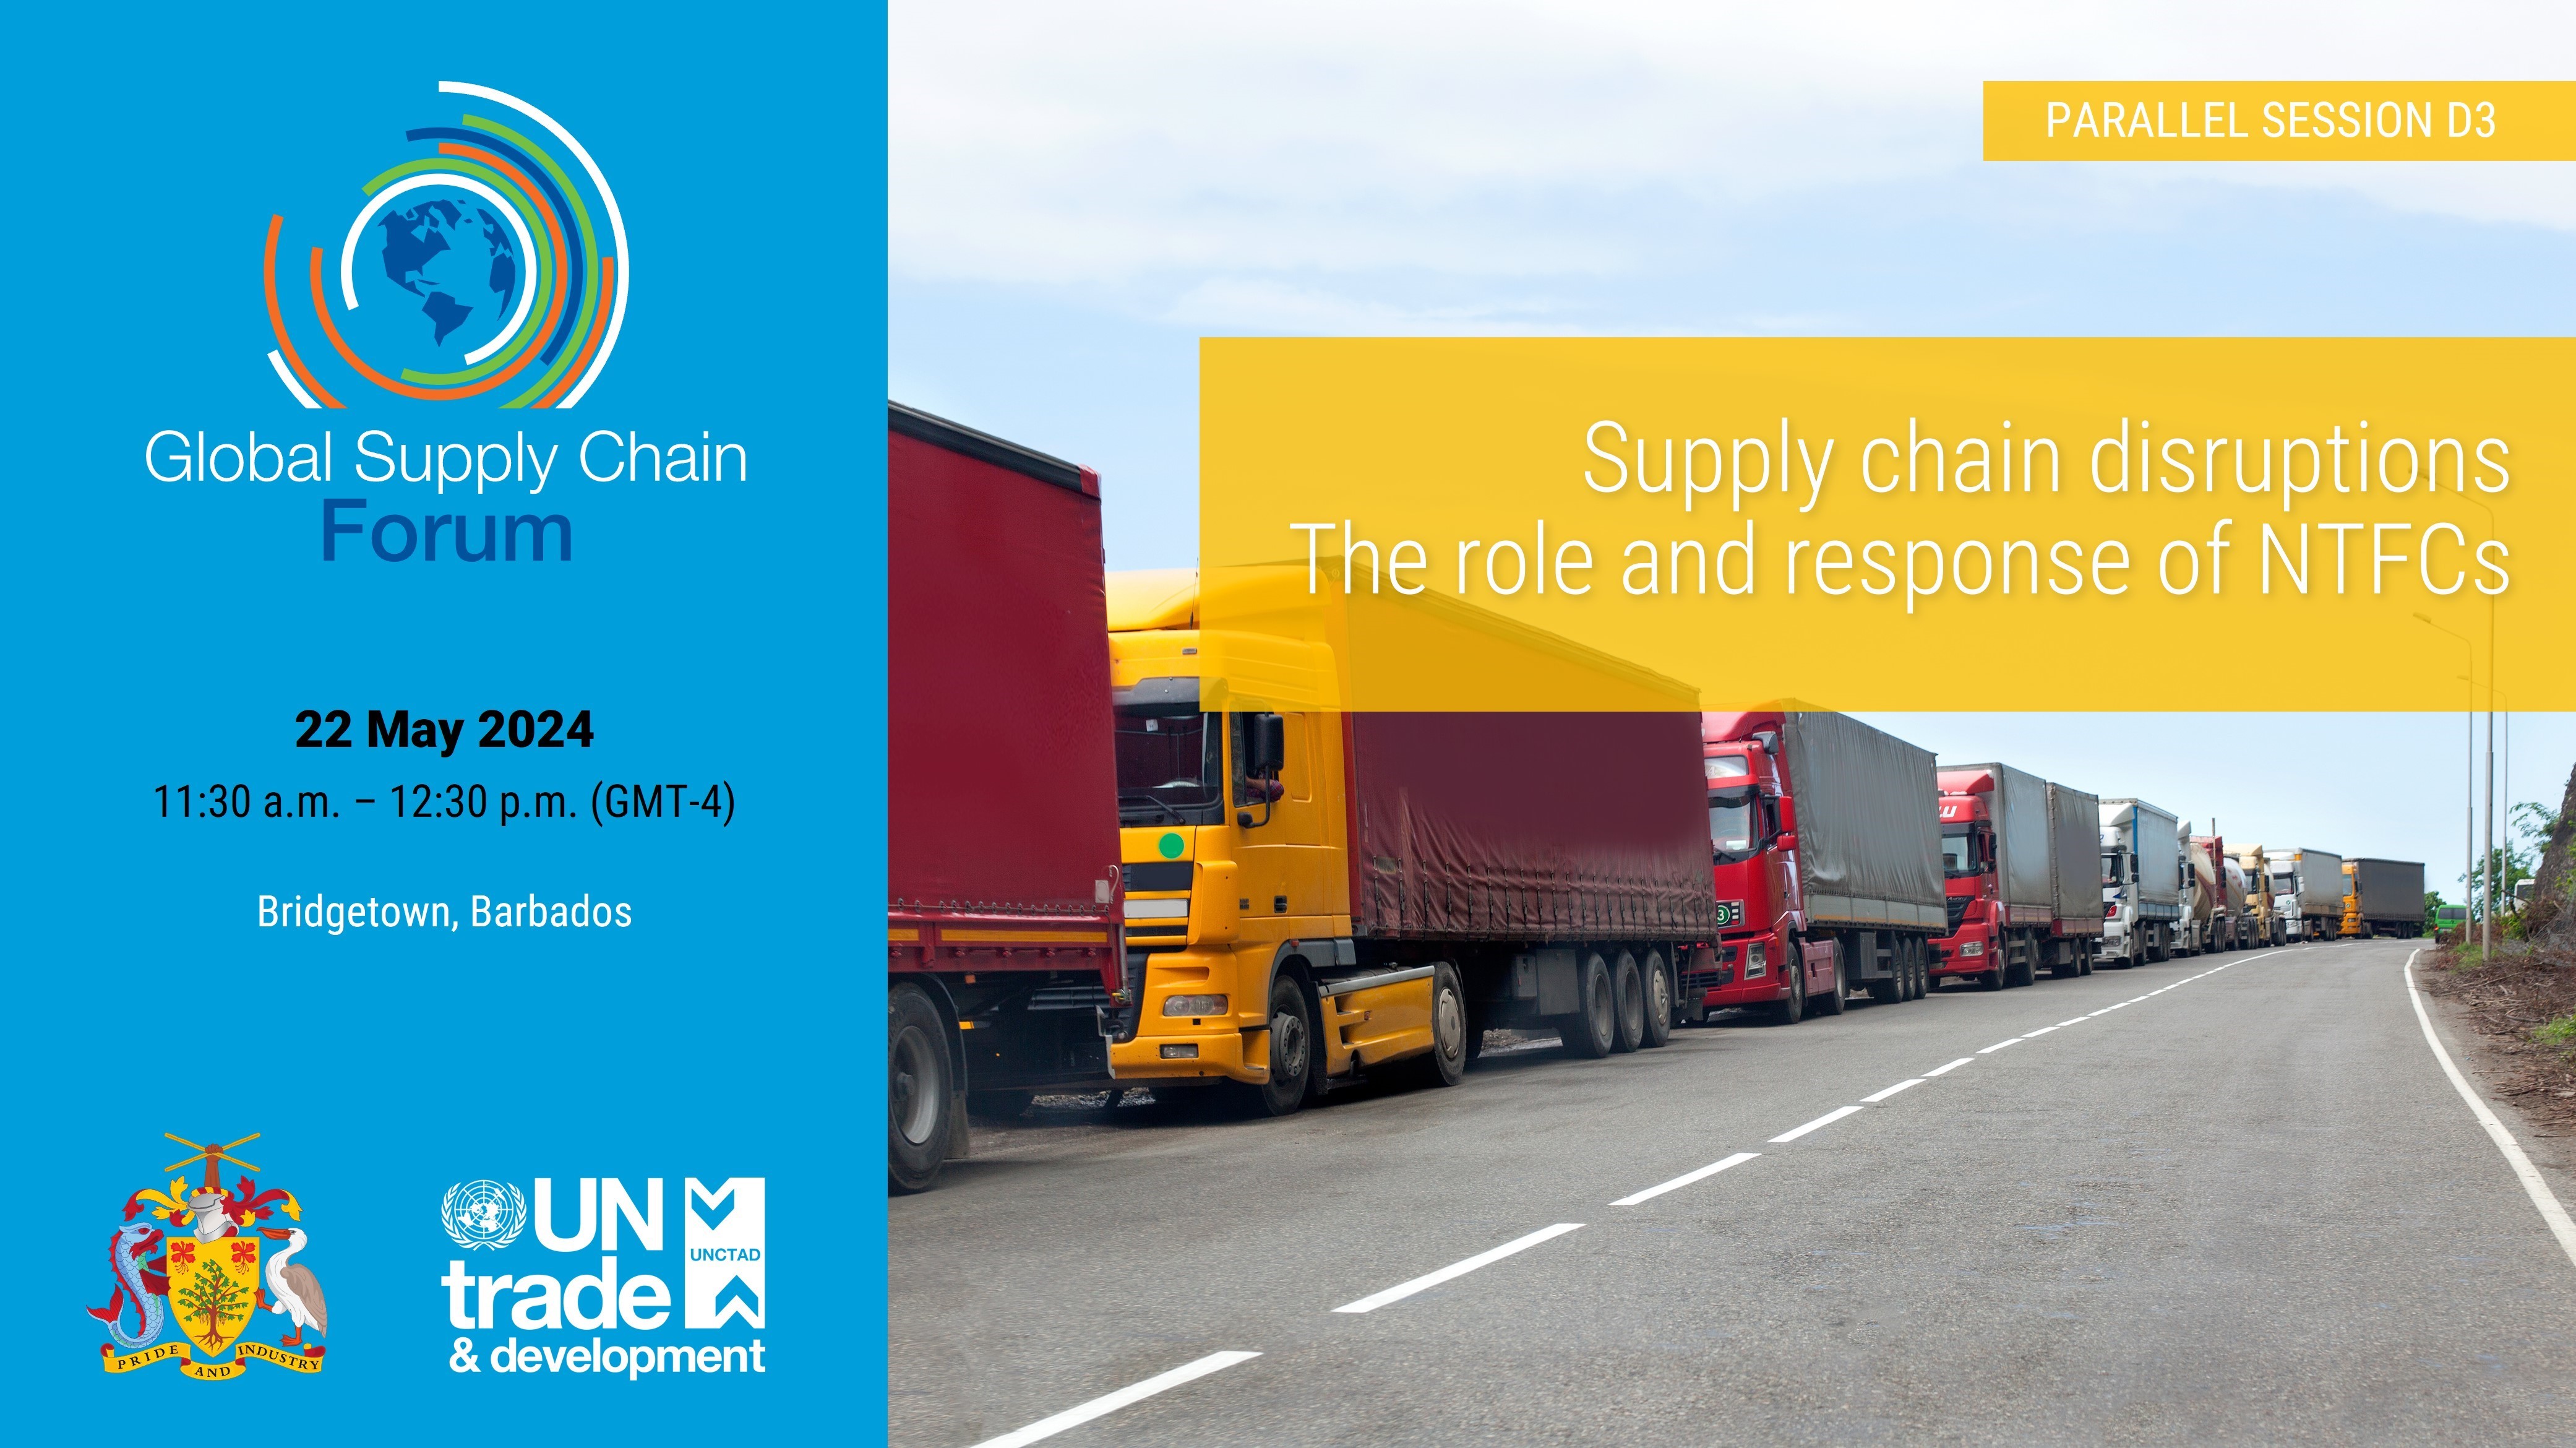 NTFC Session 3: Supply chain disruptions - the role and response of National Trade Facilitation Committees